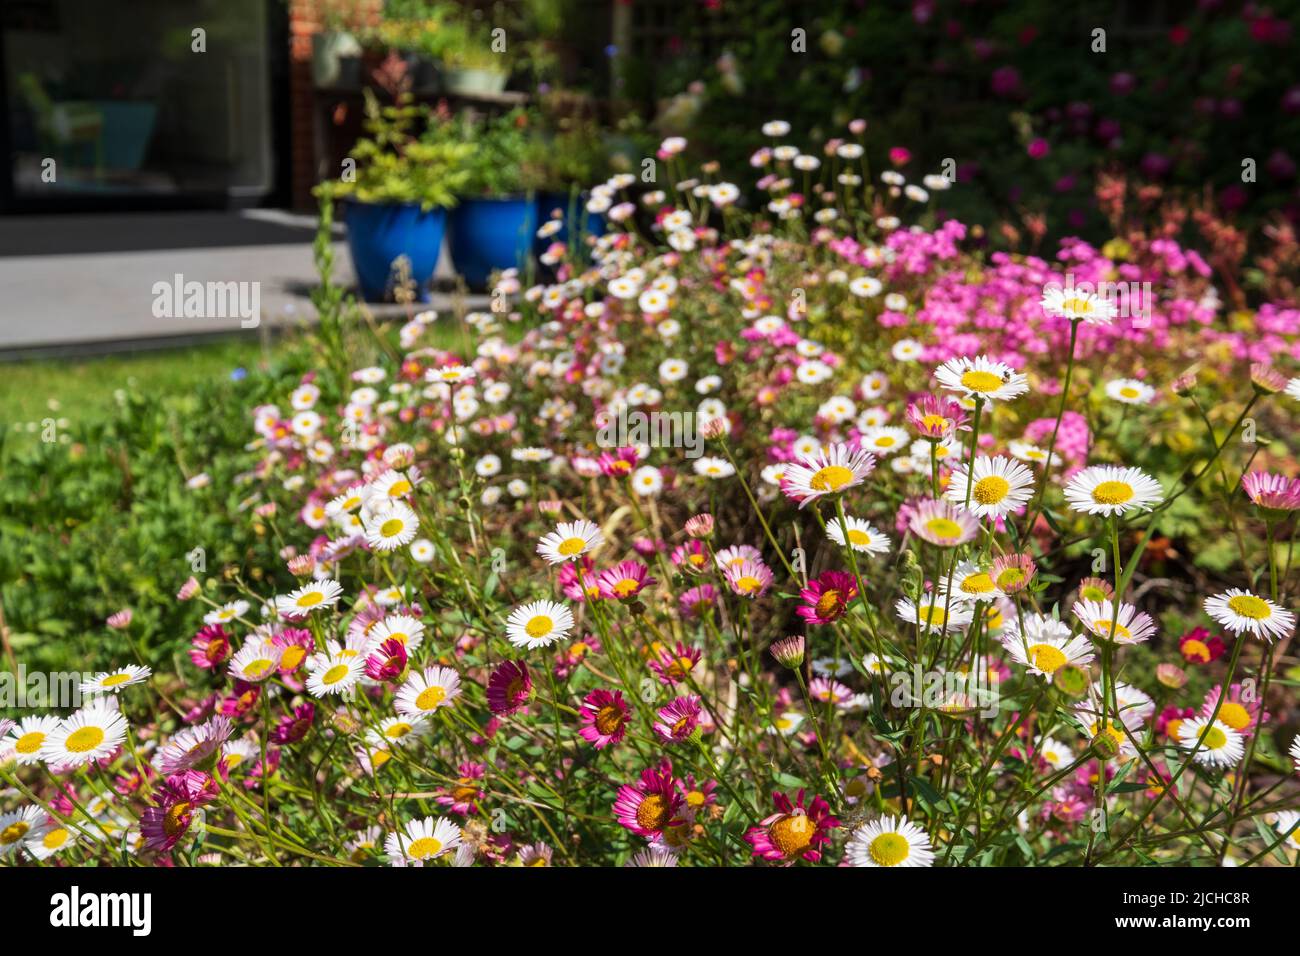 Garden in Pinner, UK, with new red brick extension and three tall windows behind. Rock garden with Mexican daisies, Erigeron Karvinskianus in front. Stock Photo